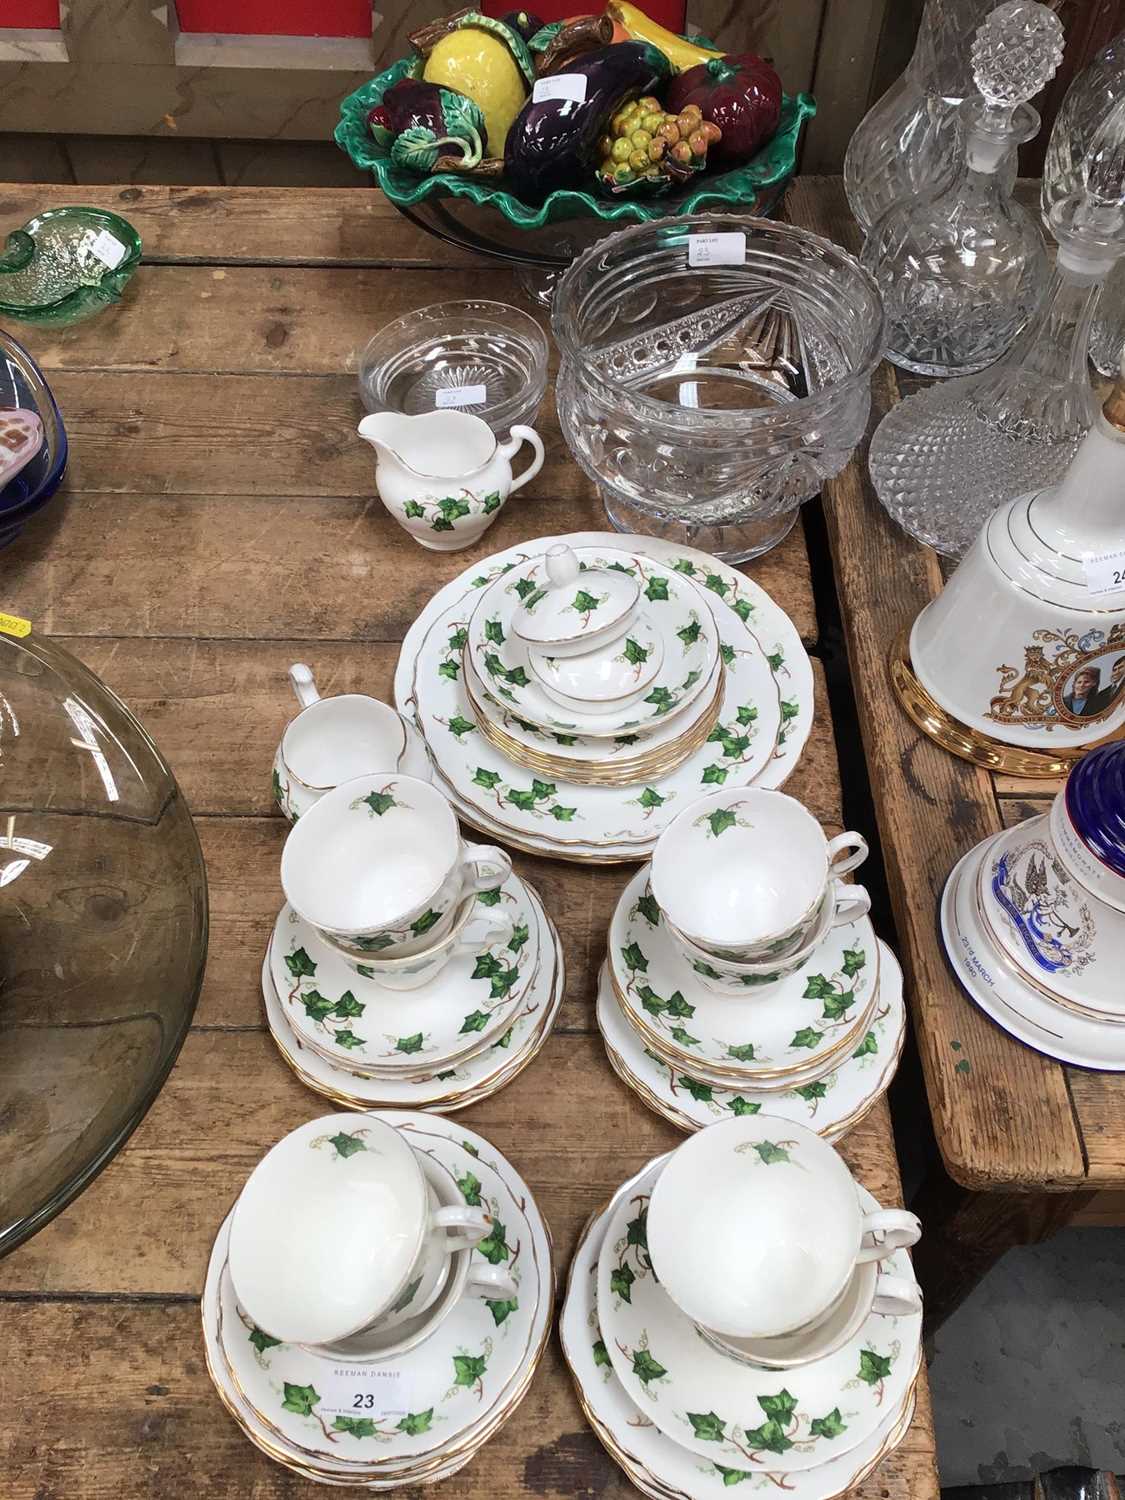 Lot 23 - Quantity of Colclough Ivy Leaf teaware, together with replica ceramic fruit in dish and other glass items